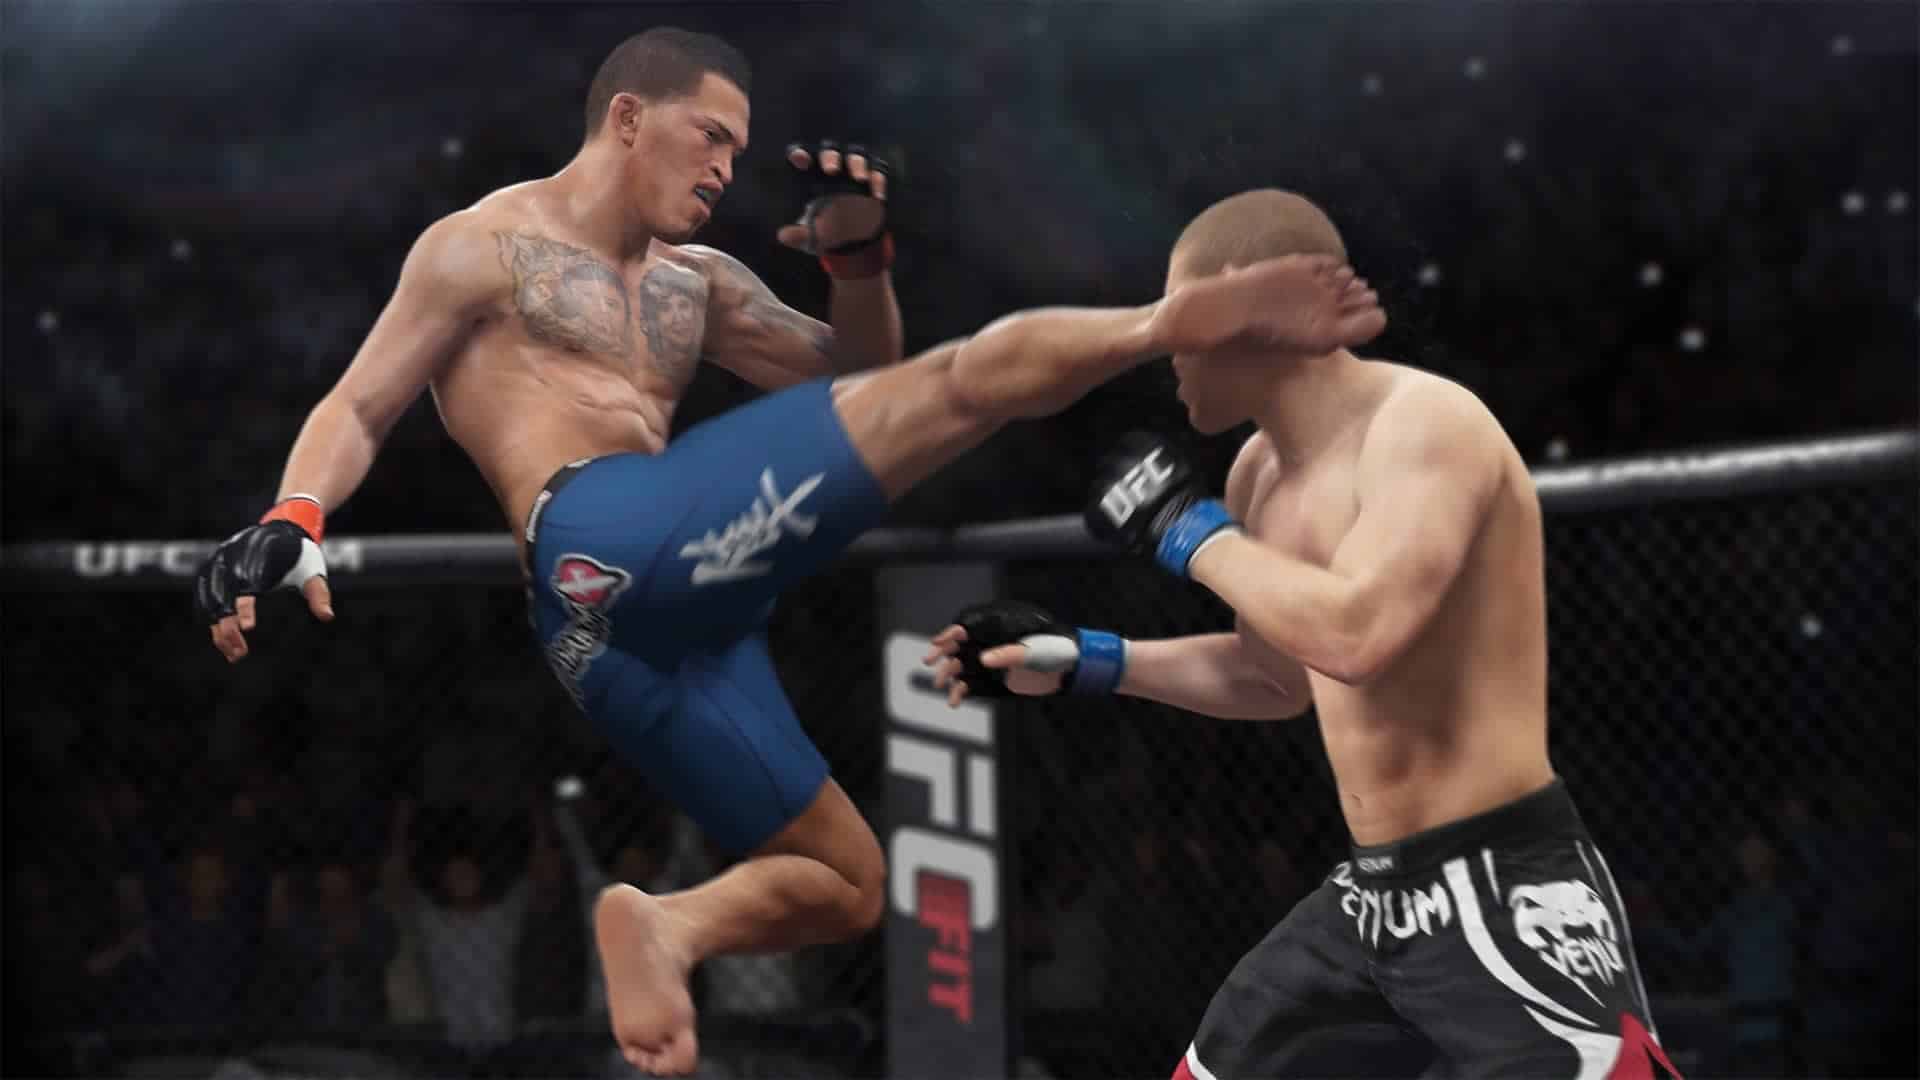 EA Sports UFC 4 screenshot - one fighter kicking the other in the face